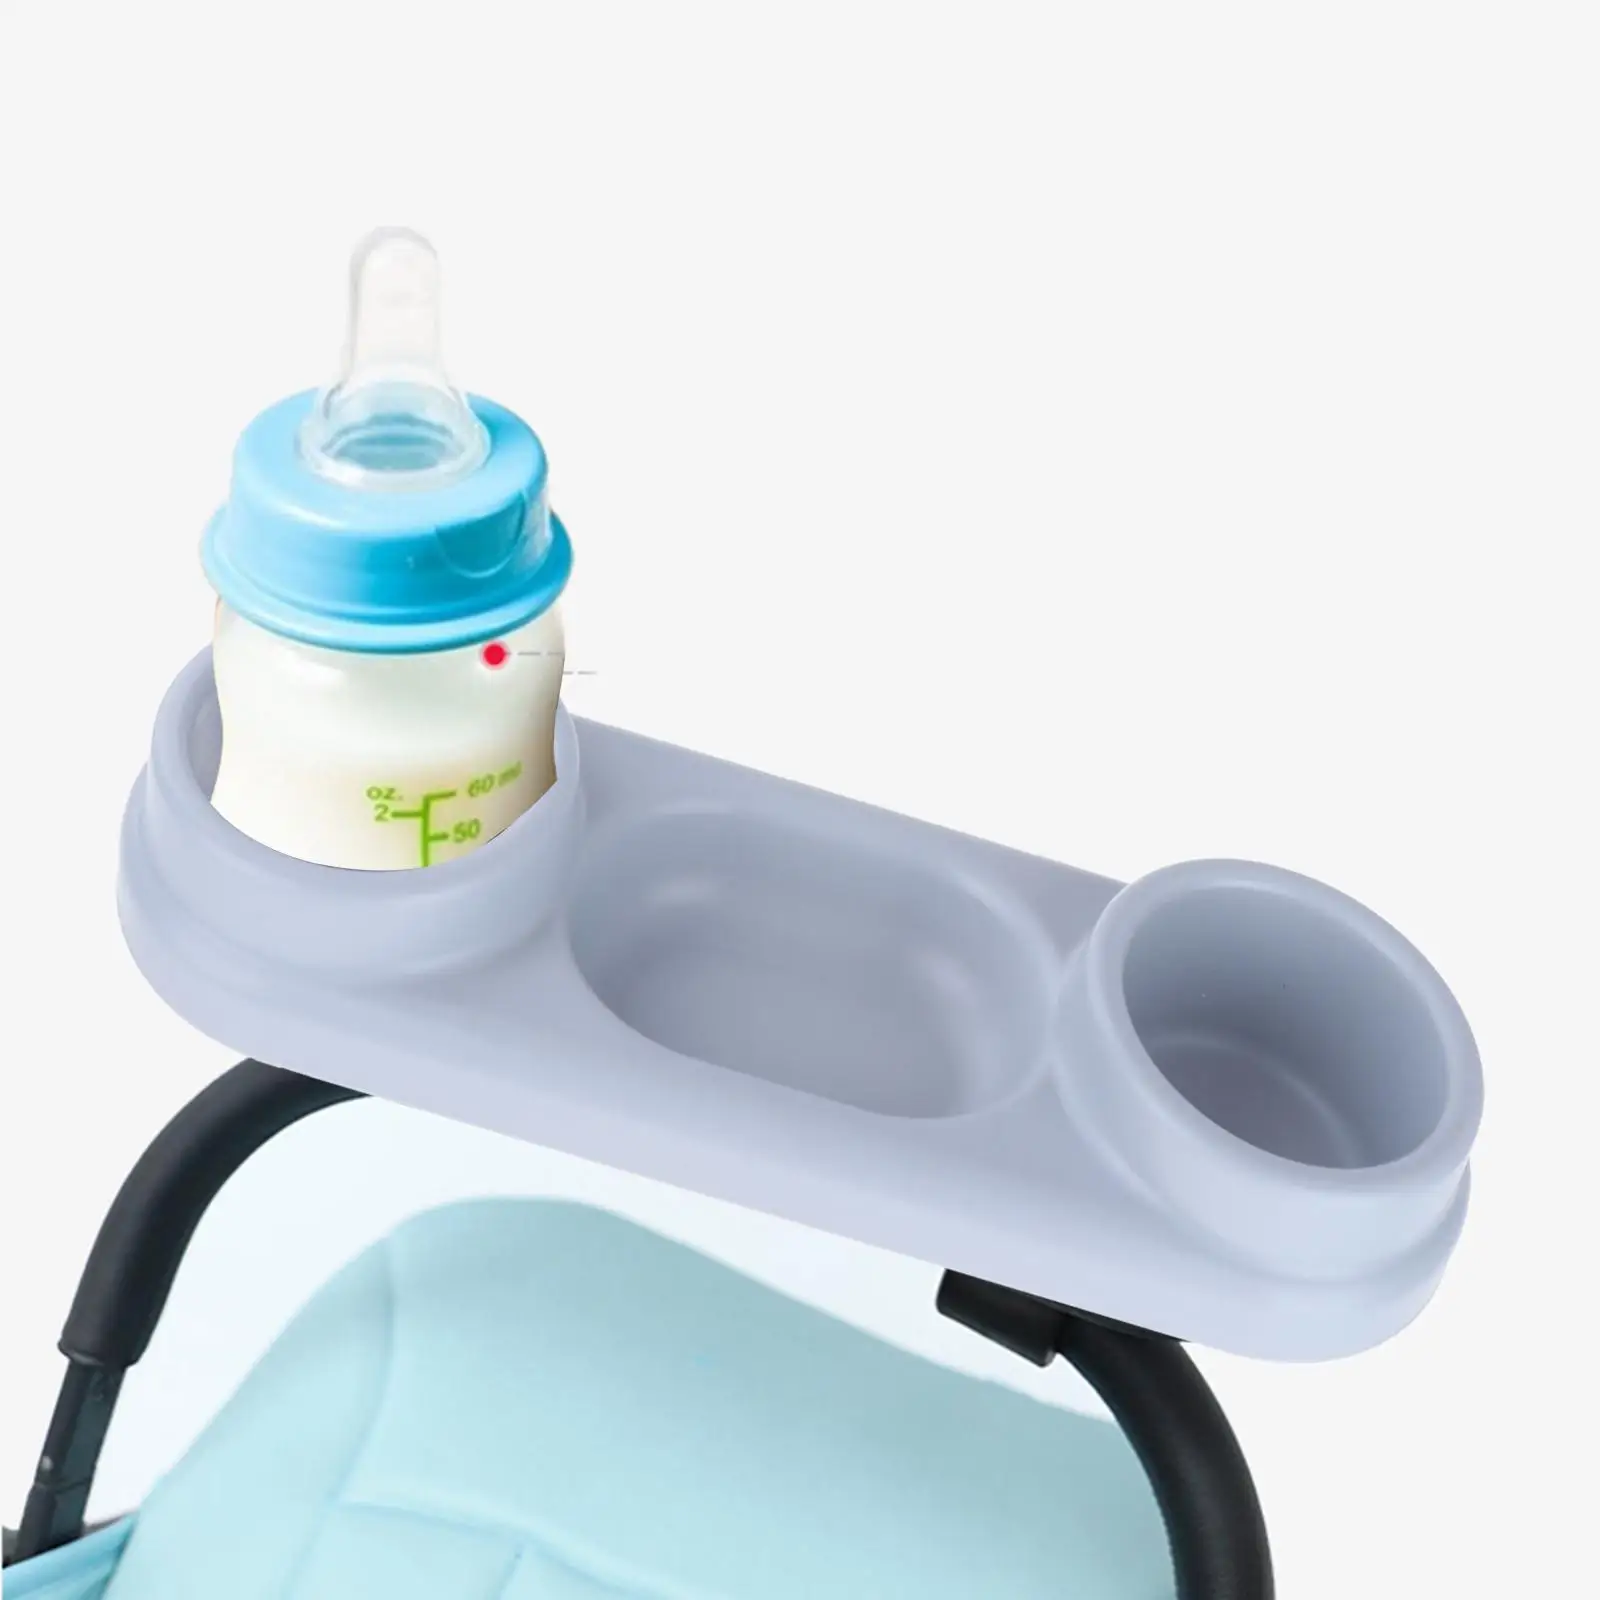 Stroller Tray Snack Tray with Cup bottle Holder for Camping Outdoor